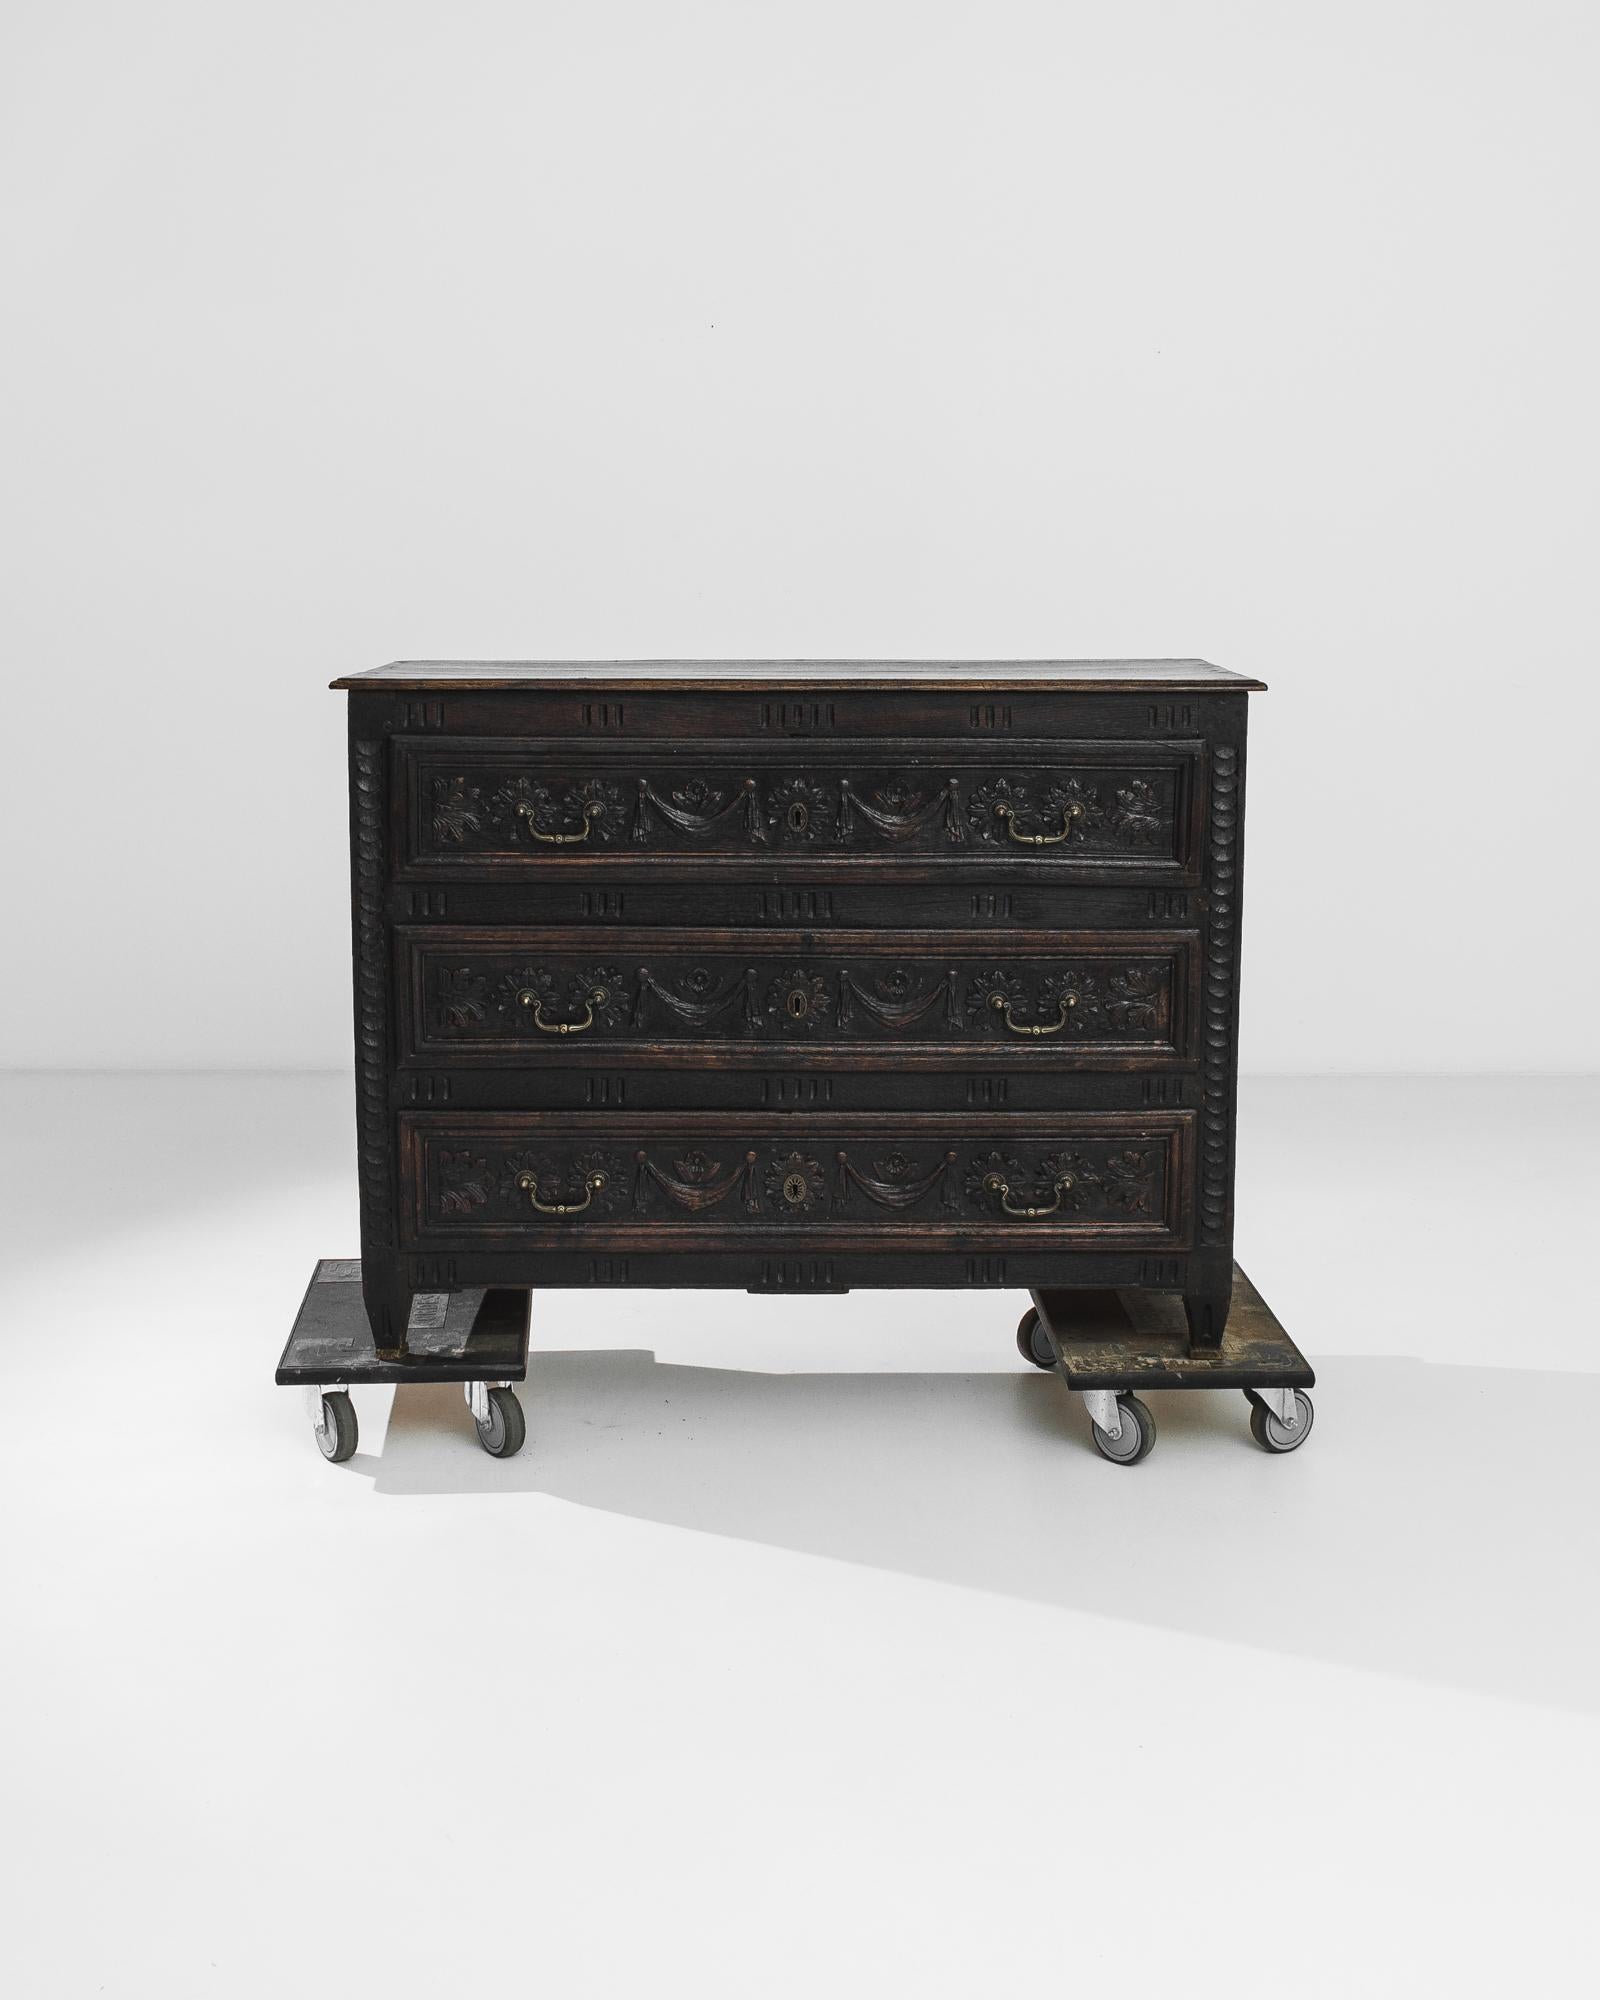 The rich, dark tone of the original patina gives this antique chest of drawers a solemn beauty. Made in France in the 1860s, the panels of the drawers are decorated with lush carving. Motifs of petalled rosettes, acanthus leaves and hanging